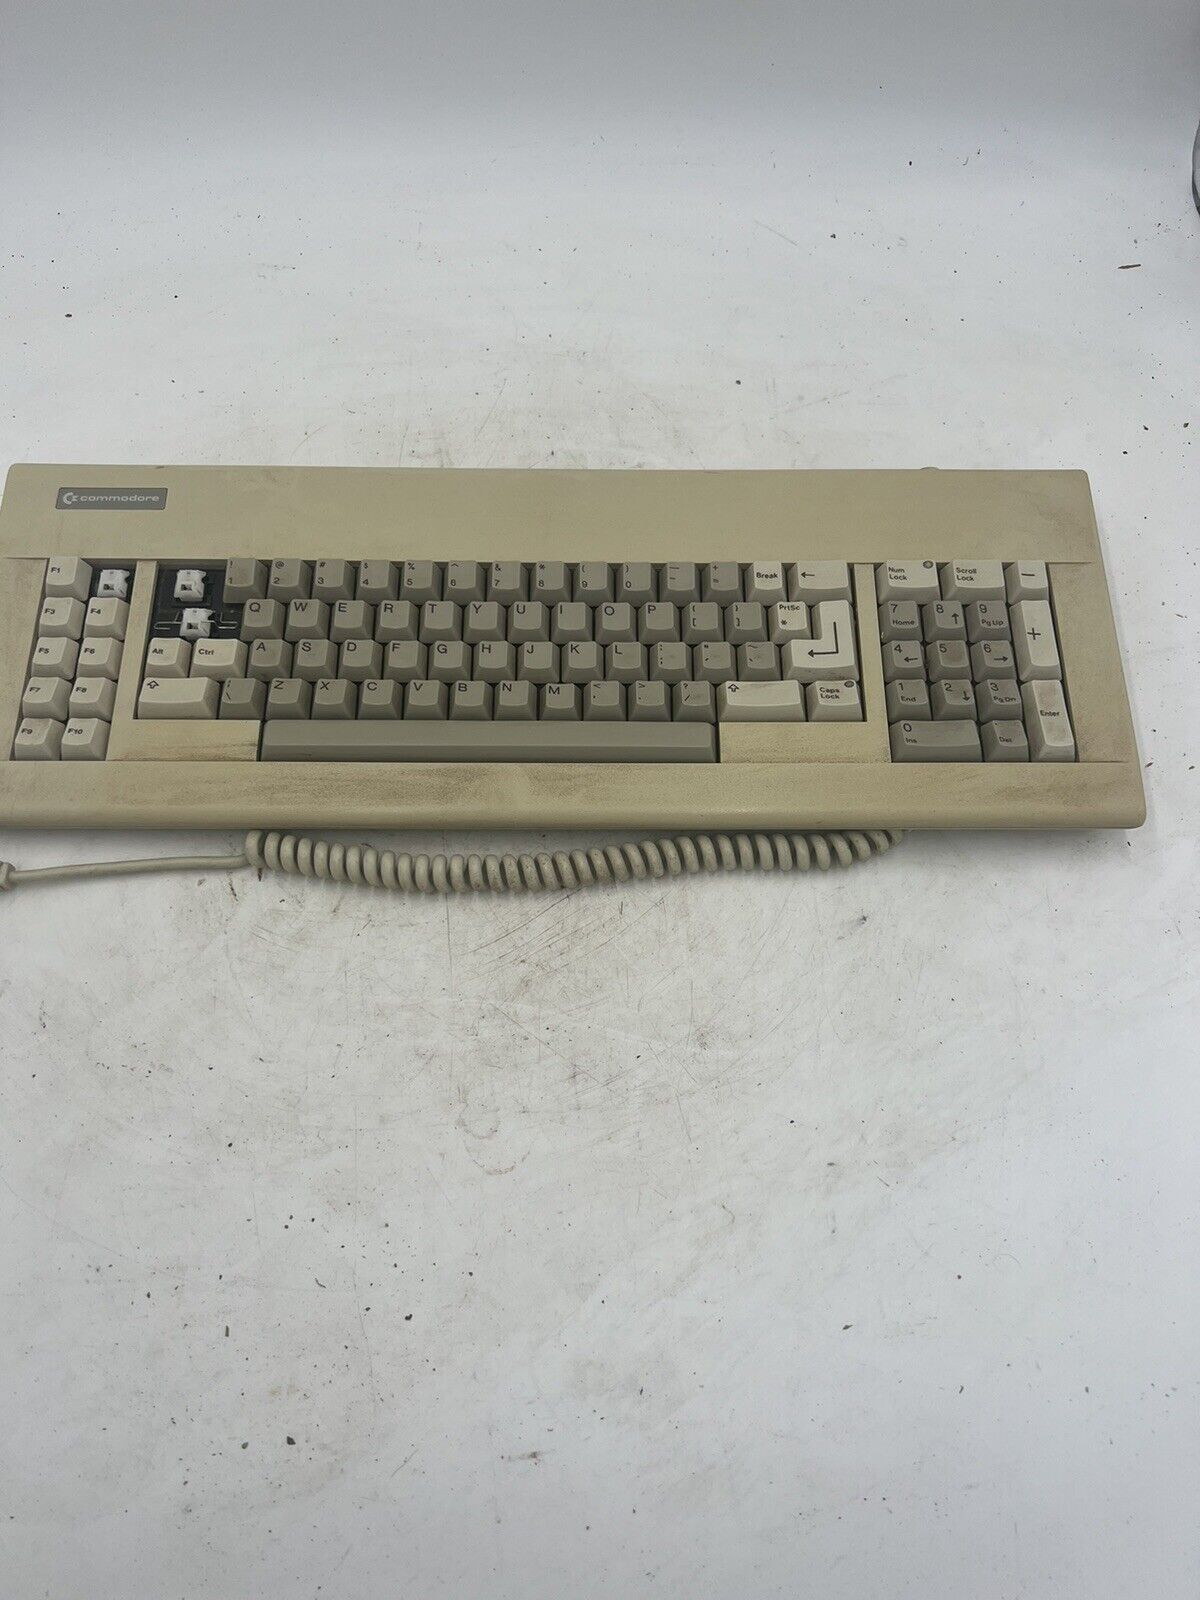 Vintage Commodore Computer Keyboard 5 Pin Plug Untested As Is